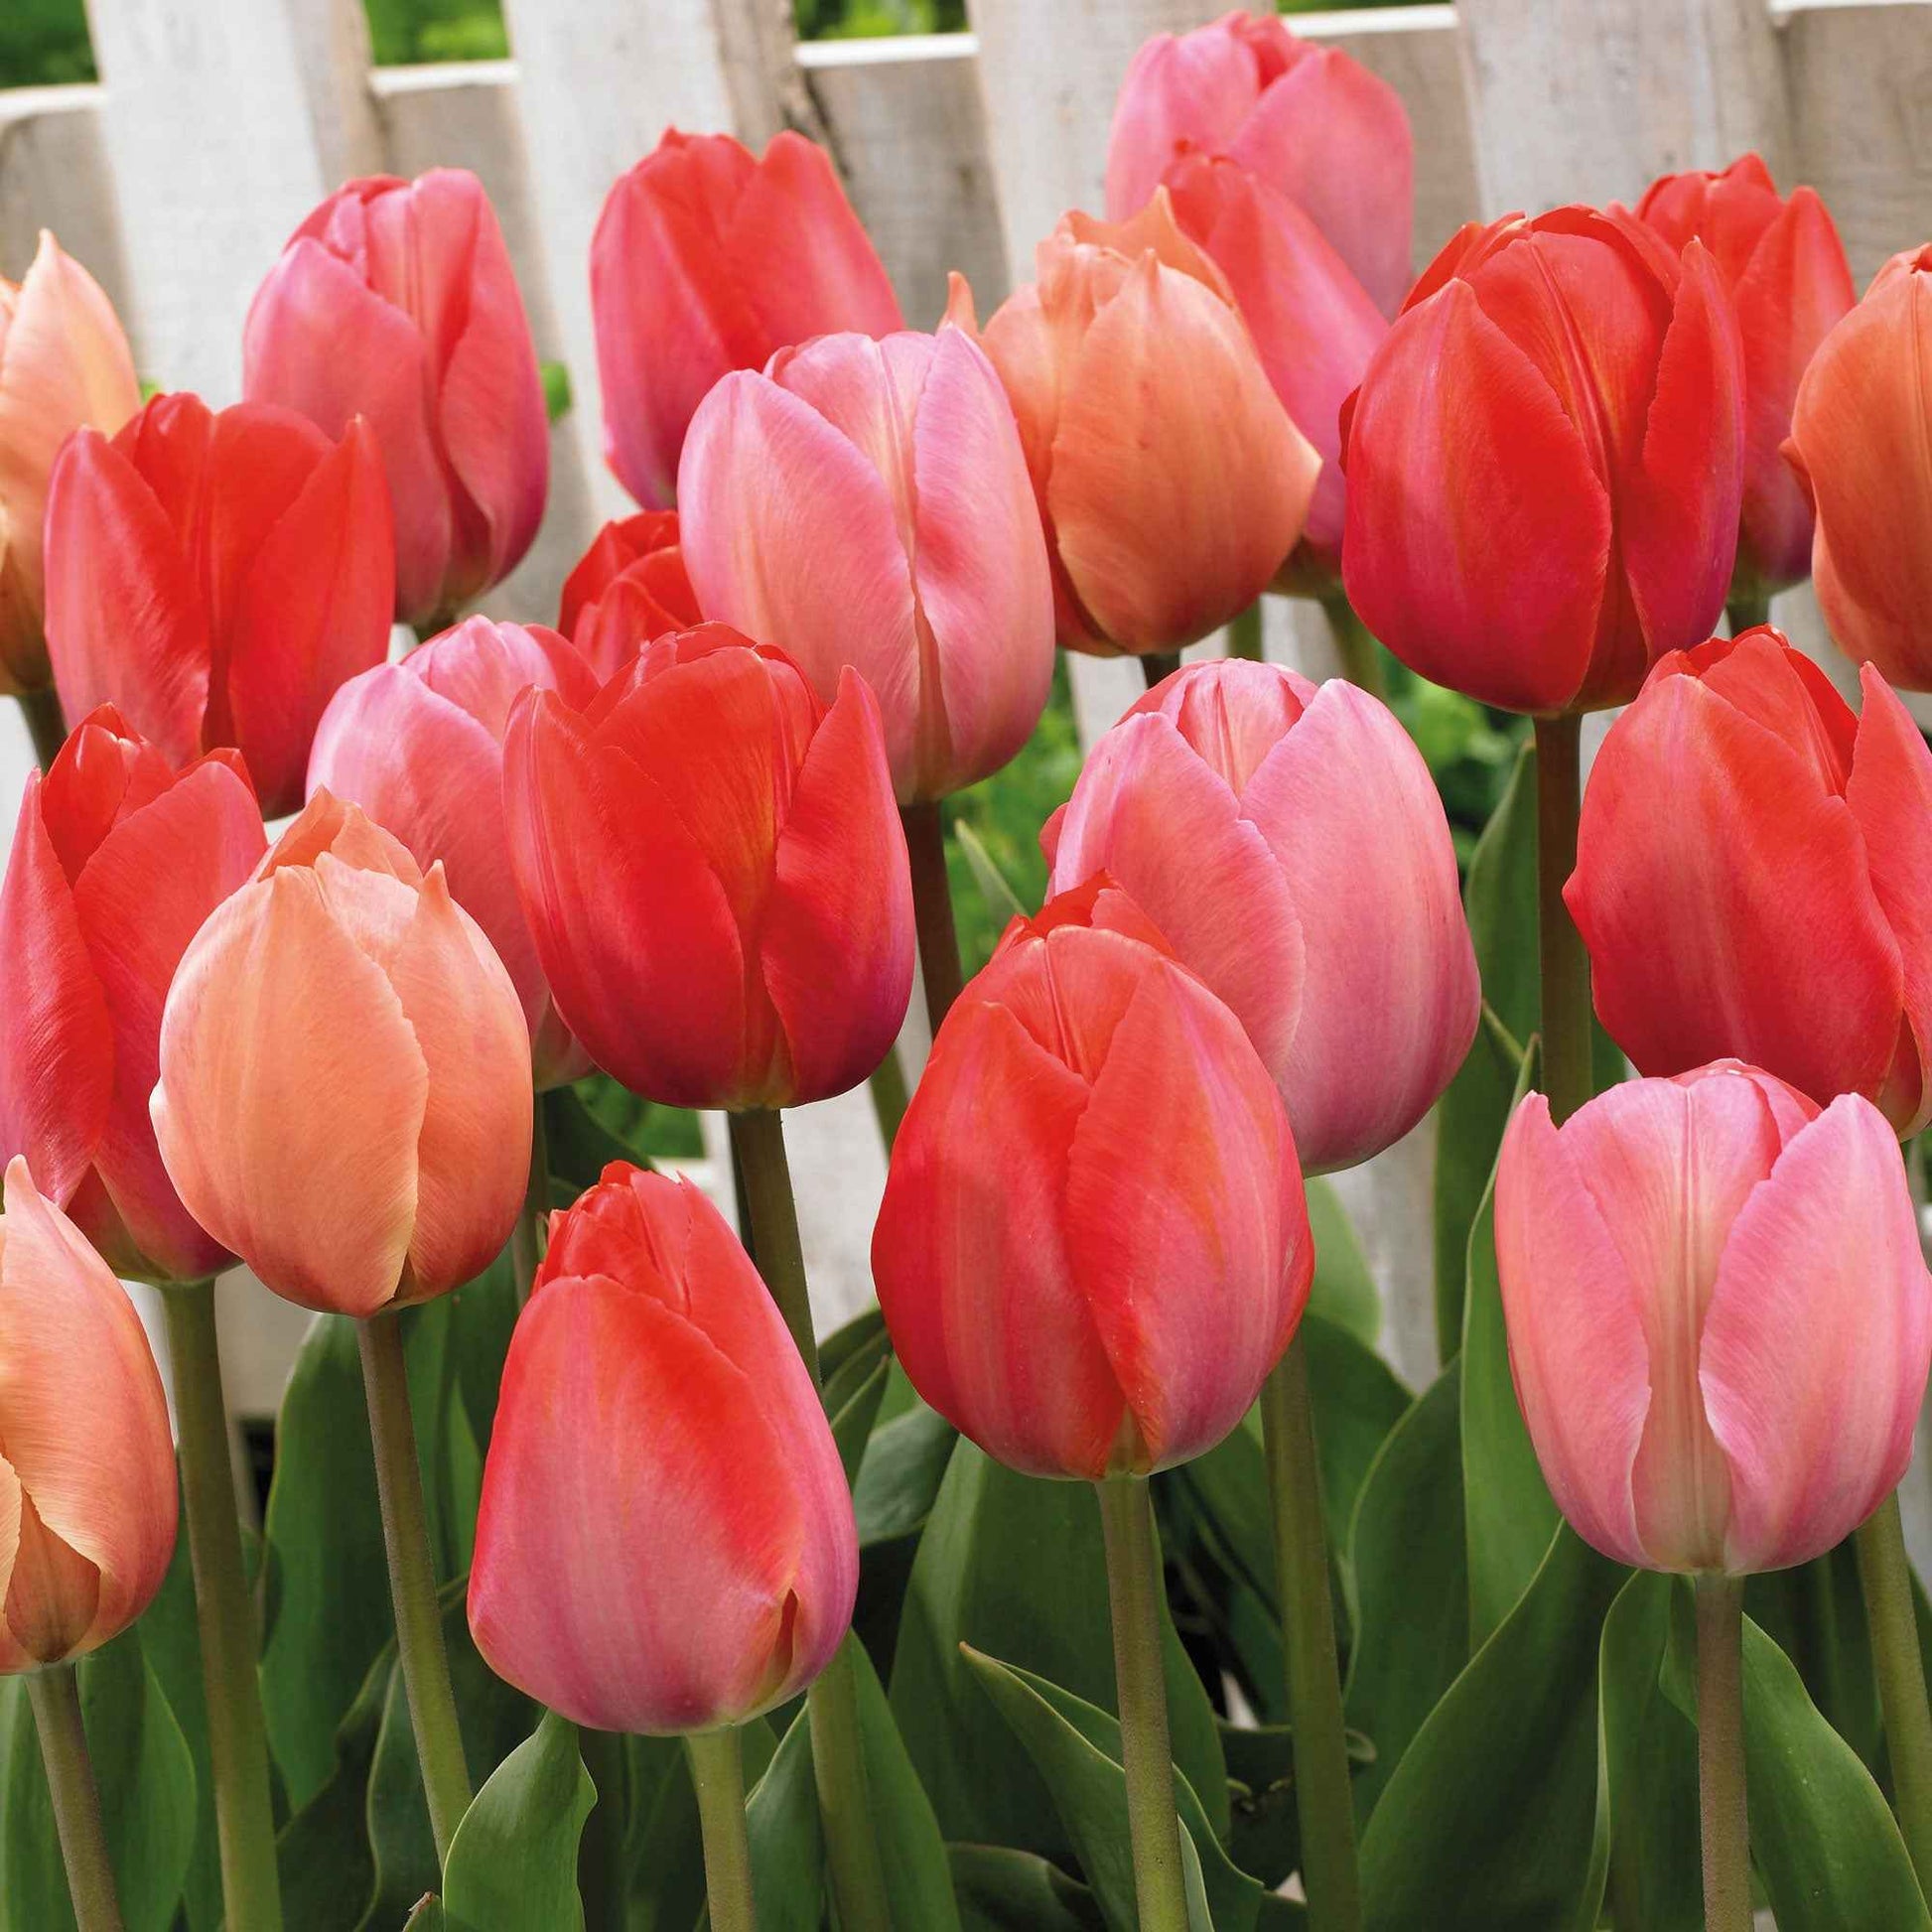 16x Tulp Tulipa 'The Red Box' rood - Alle populaire bloembollen